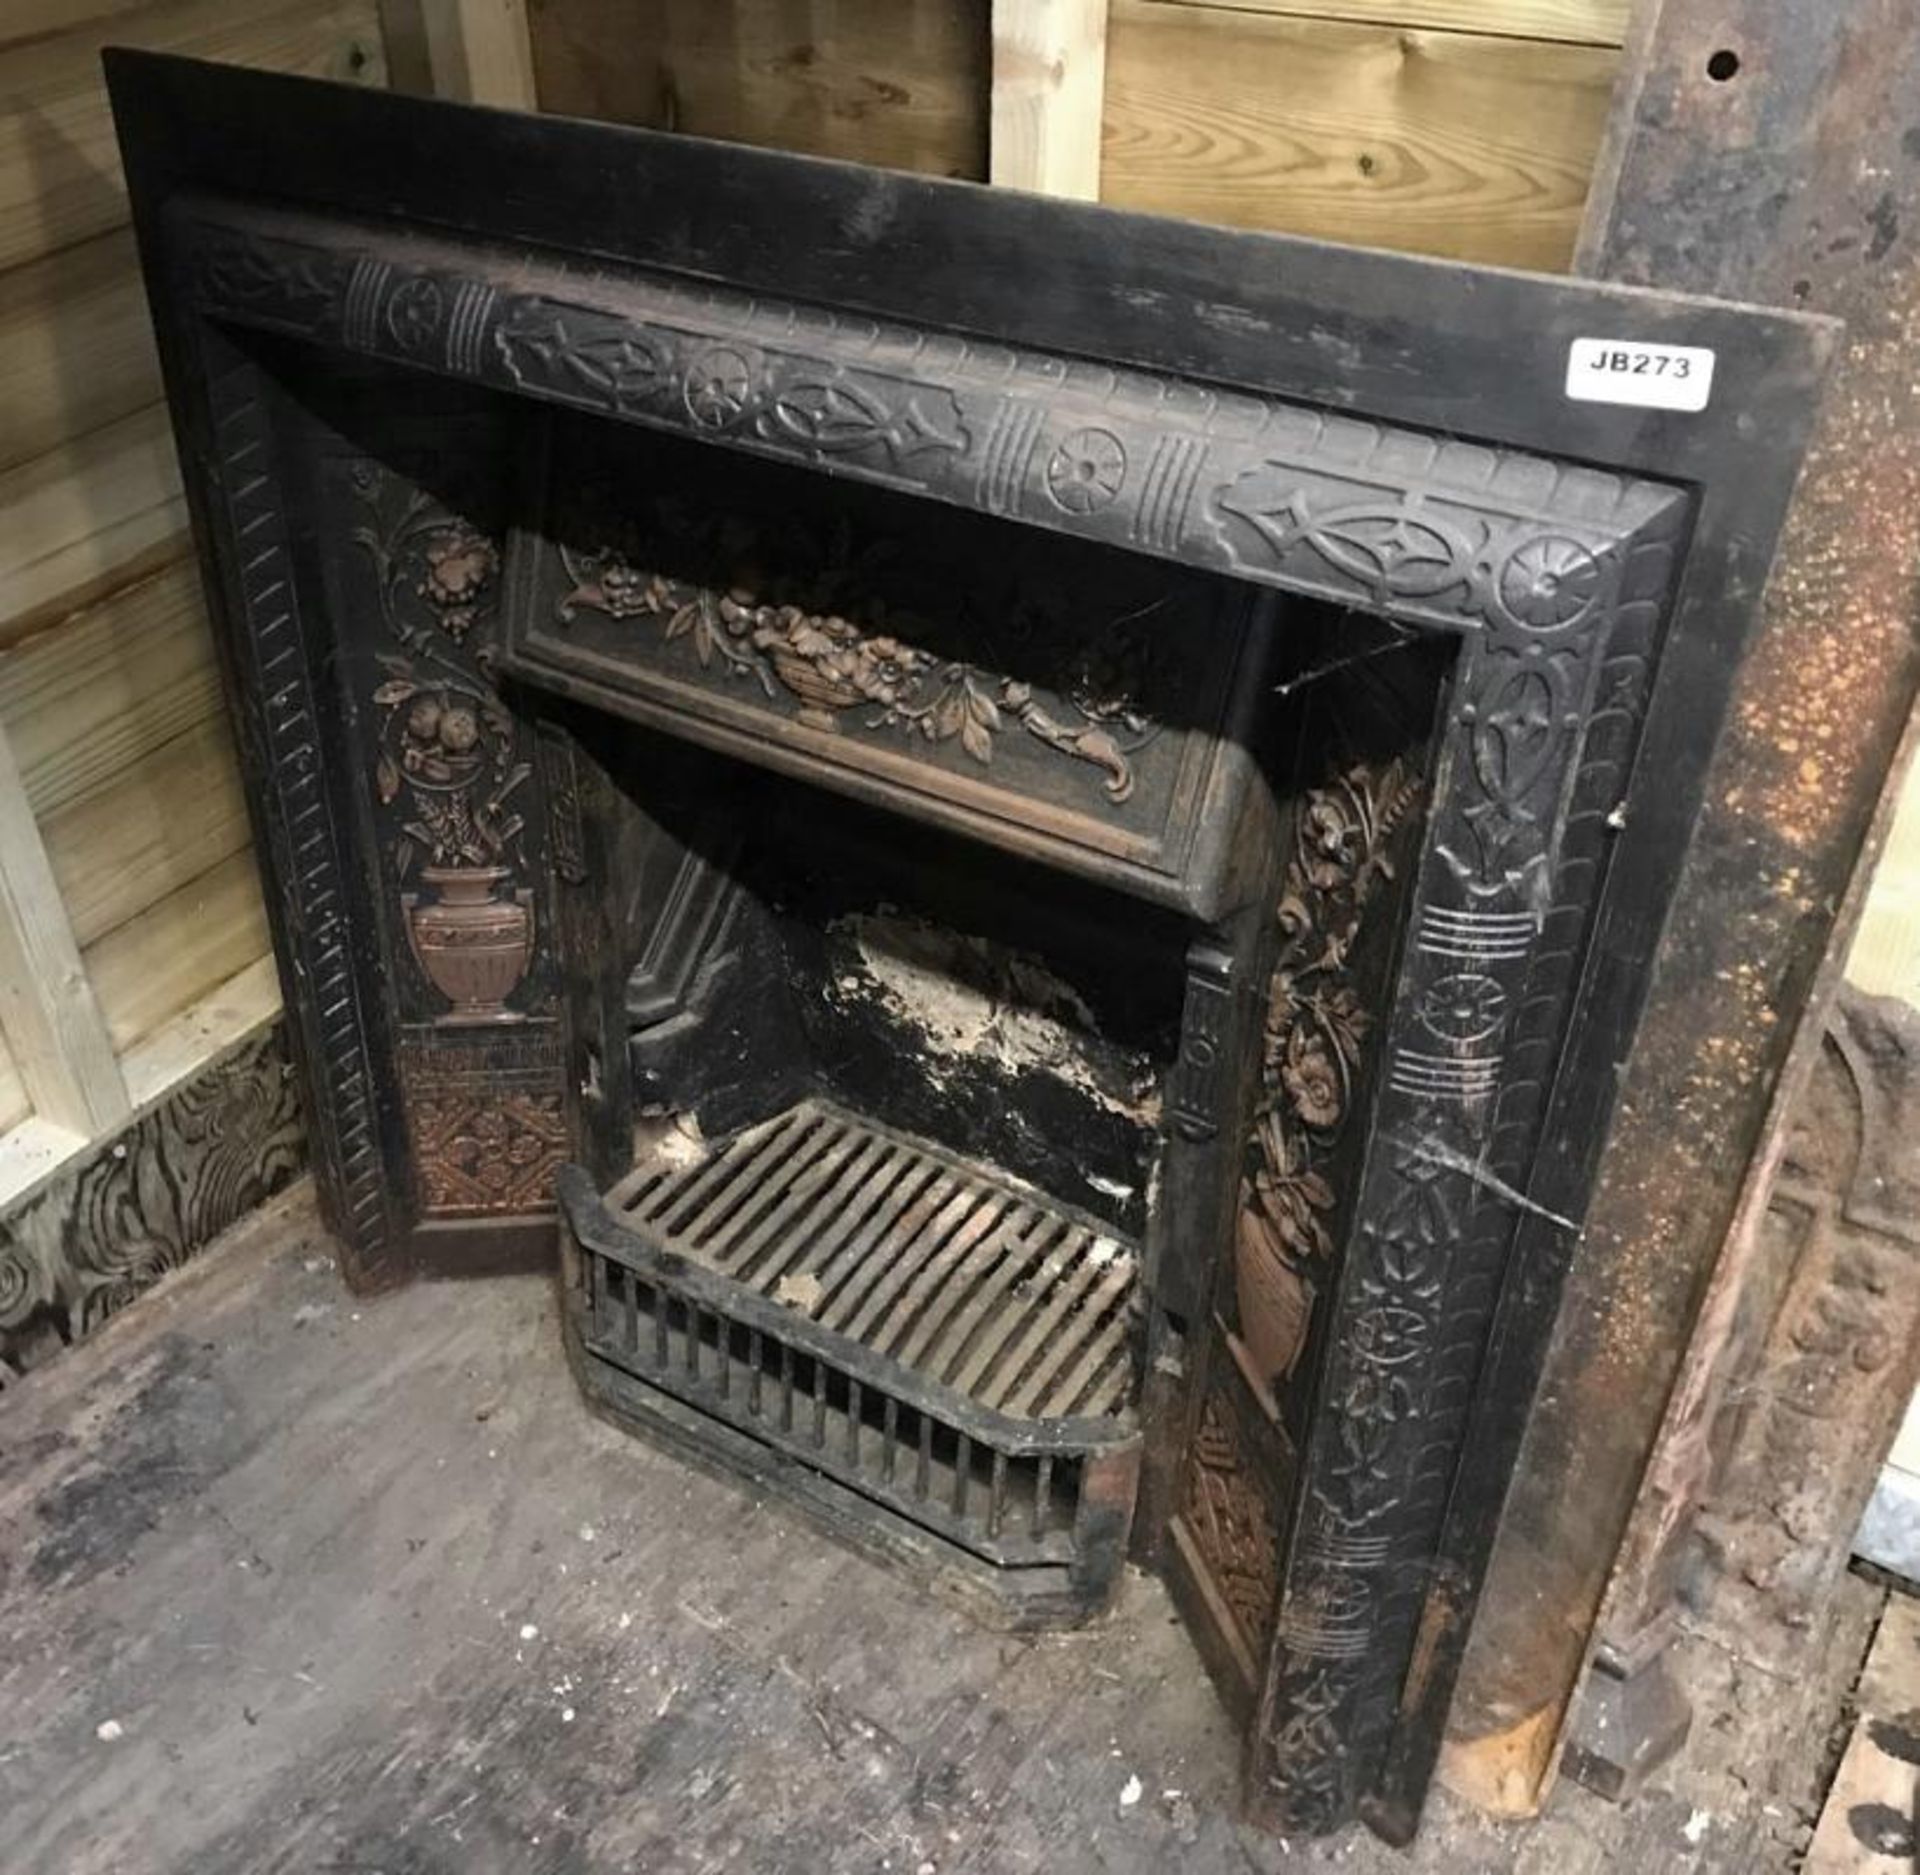 1 x Ultra Rare Stunning Antique Victorian Cast Iron Fire Insert With Ornate Cast Iron Tiles To